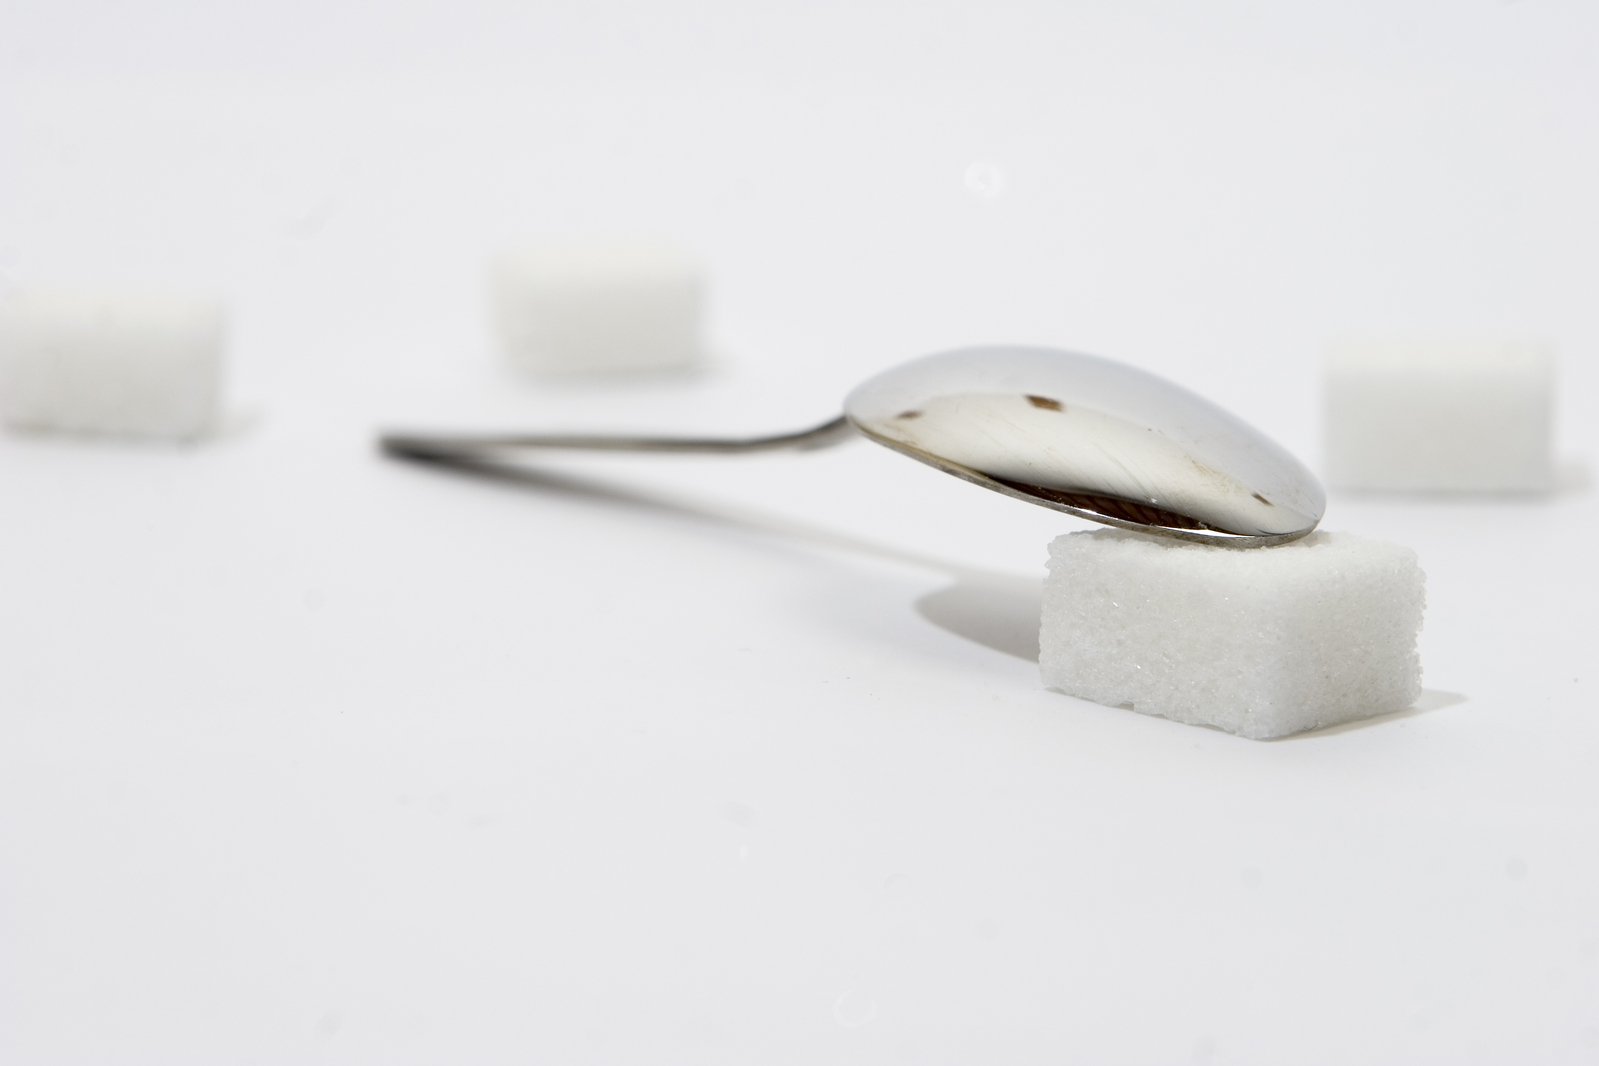 a spoon and a piece of sugar with the spoon sticking out